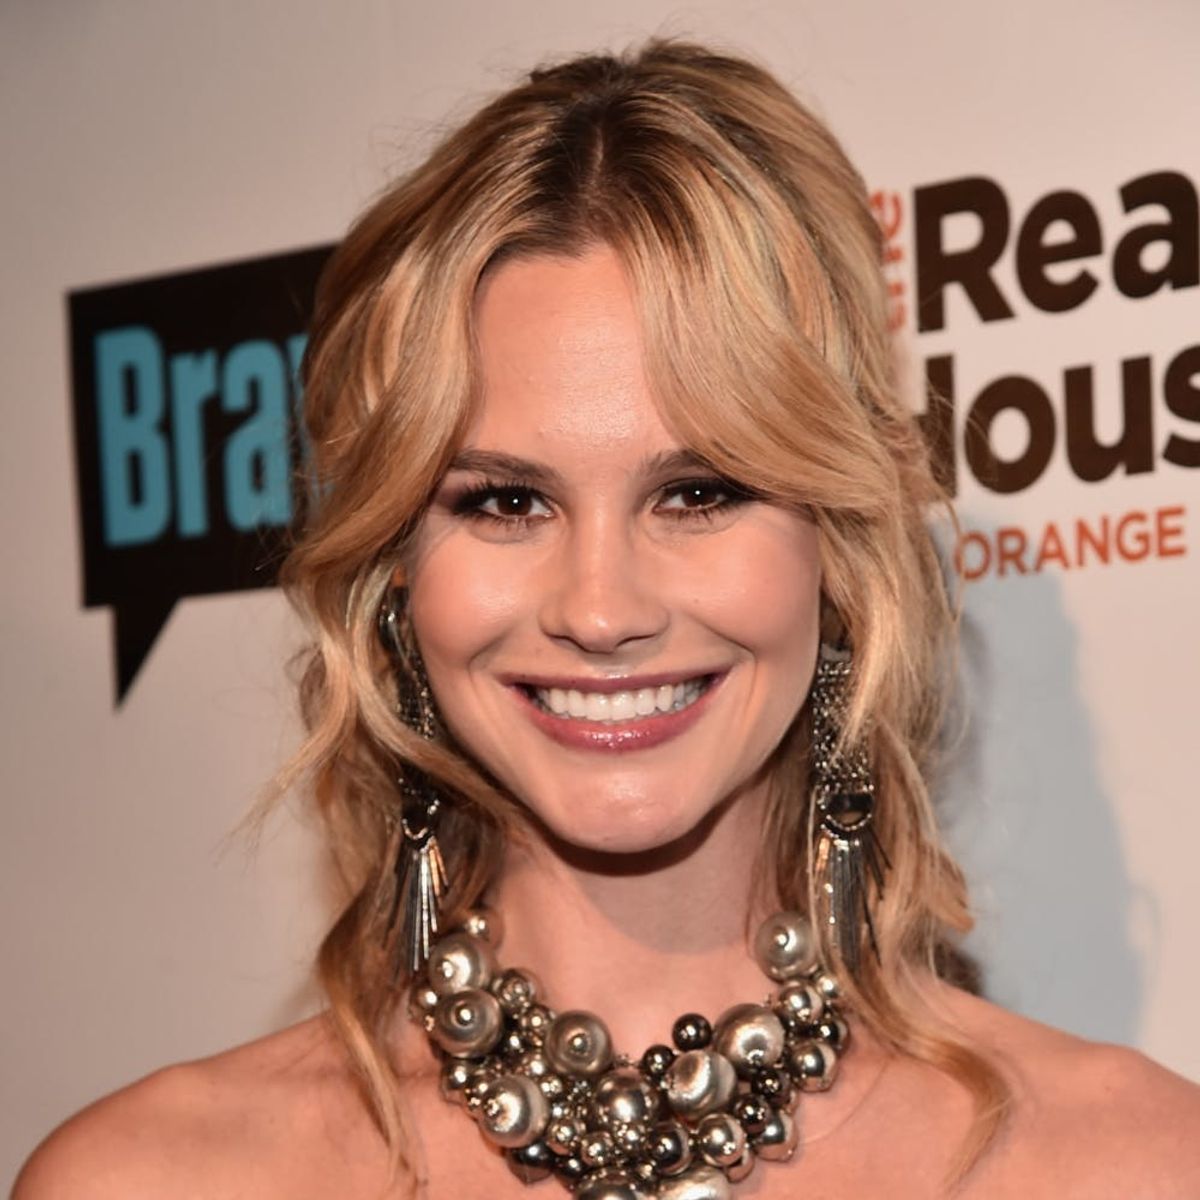 Meghan King Edmonds Is Pregnant and Reveals Her Baby Bump in a Teeny Bikini